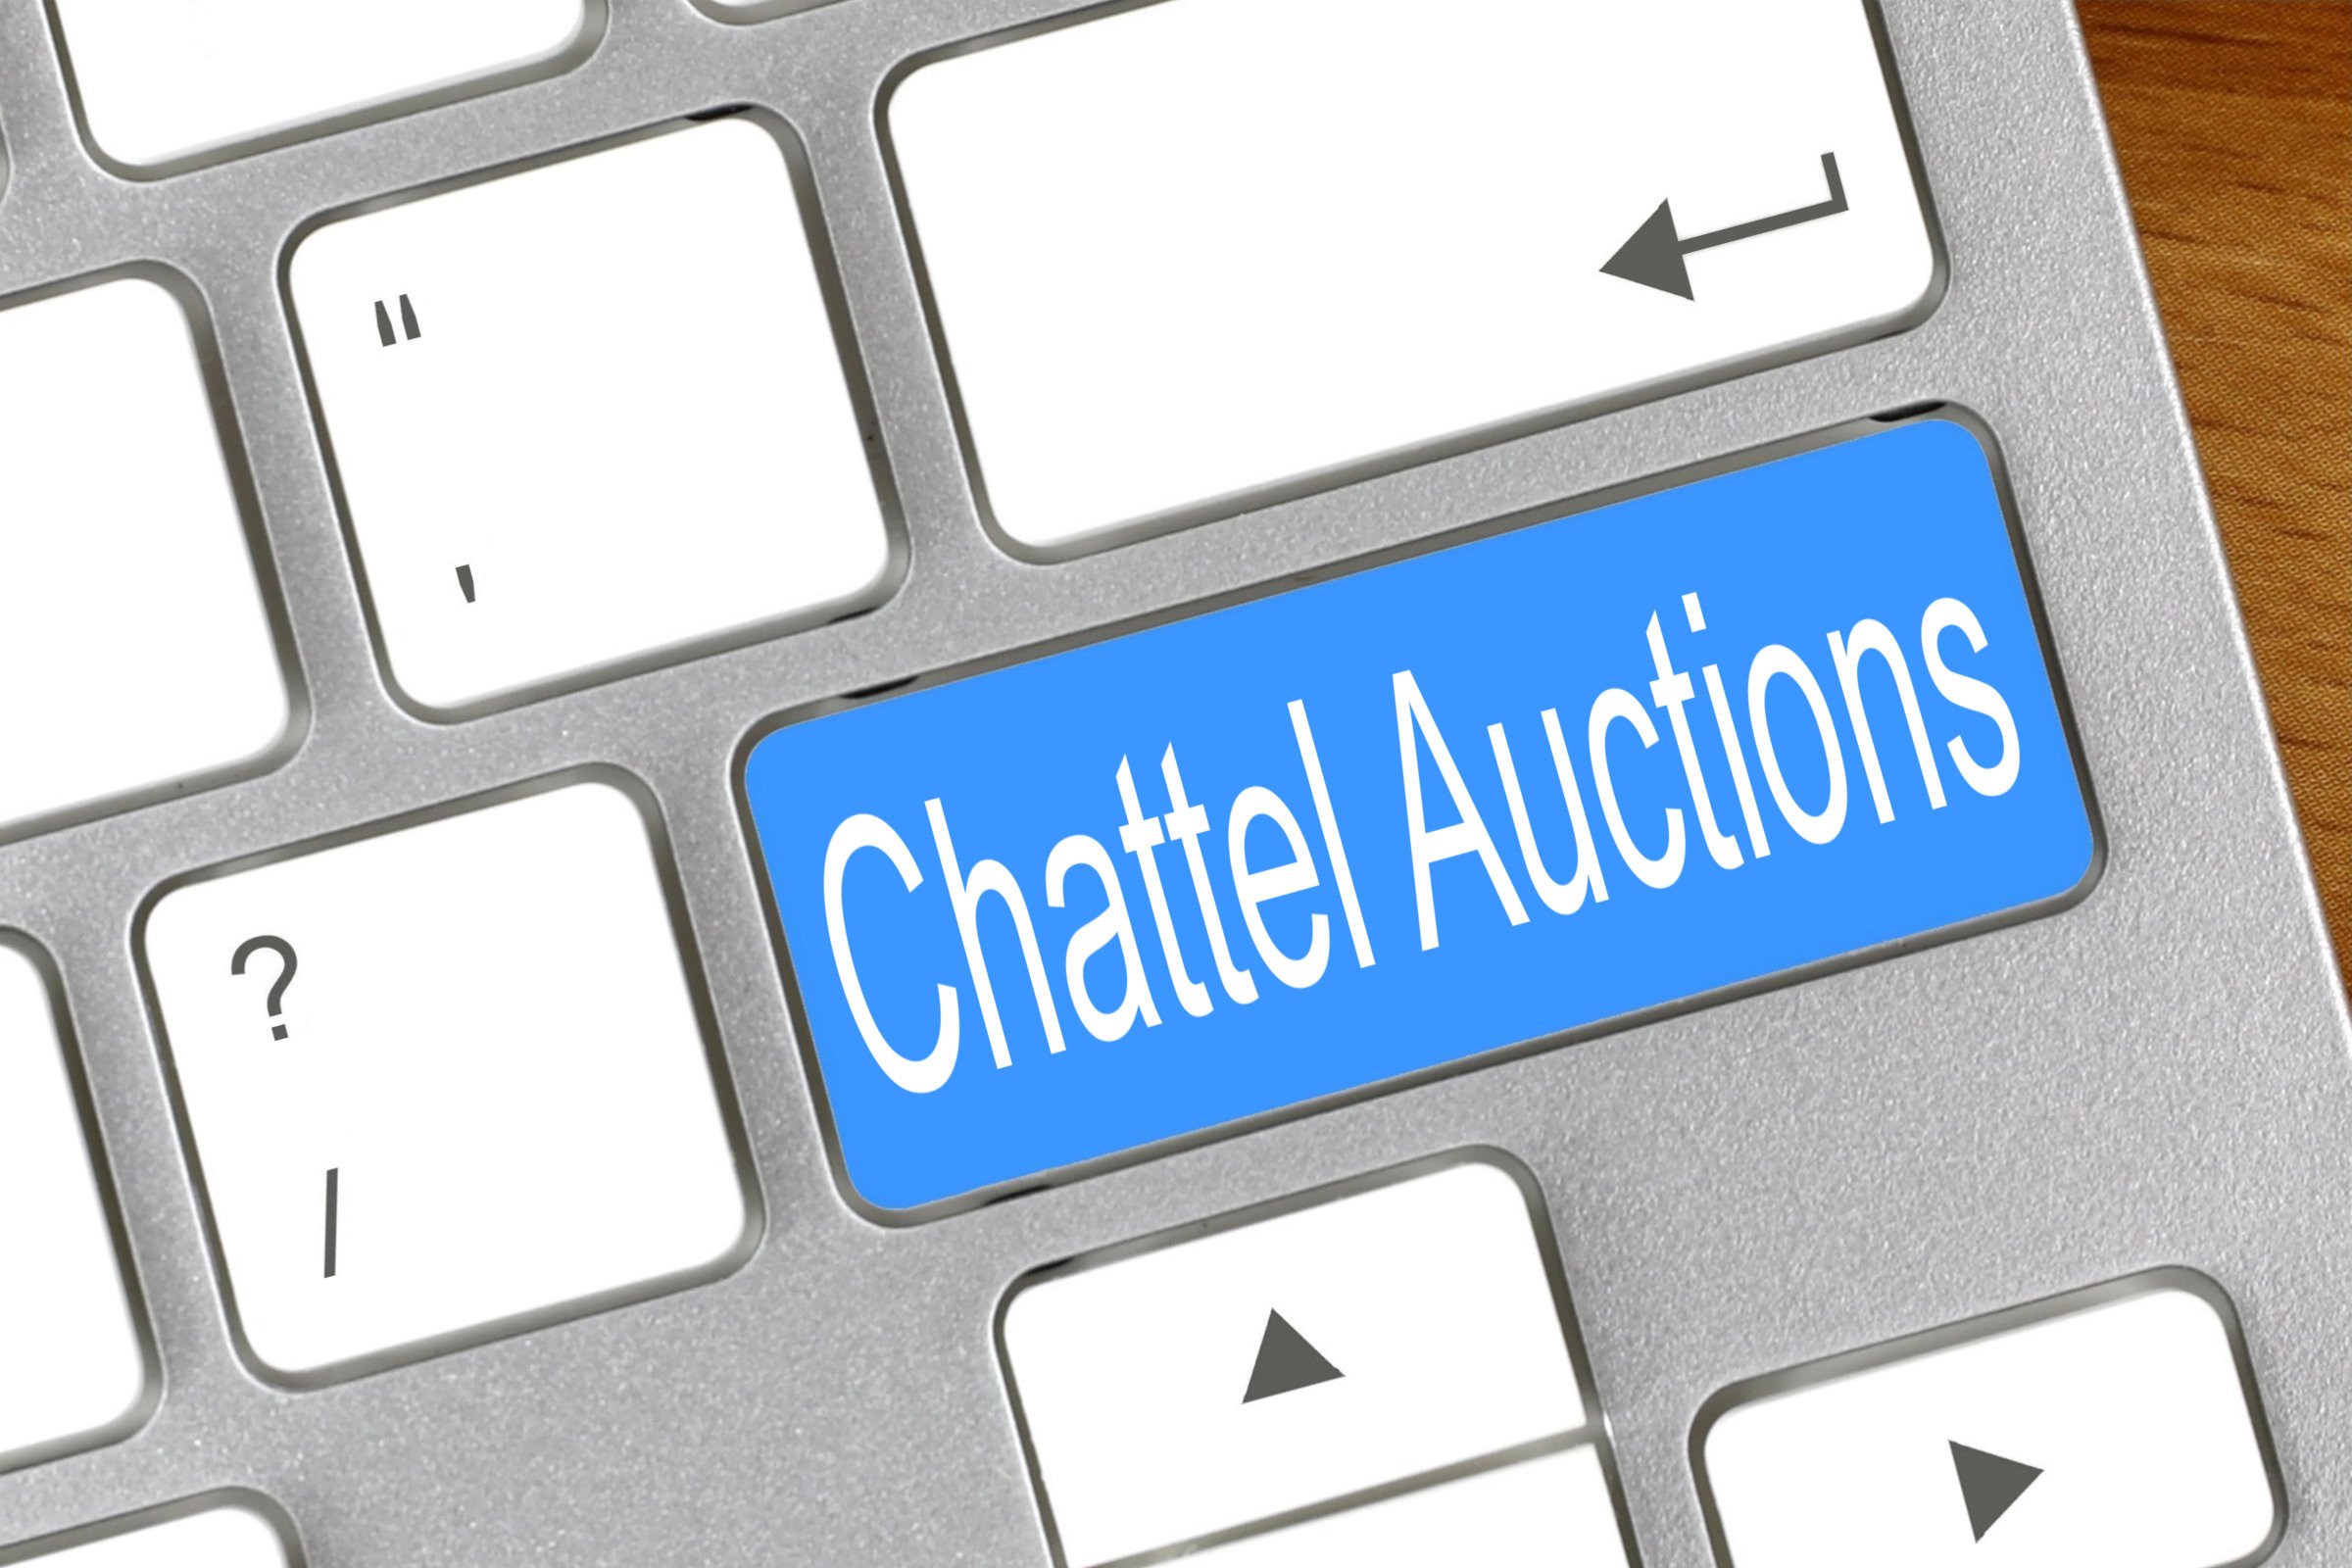 chattel auctions